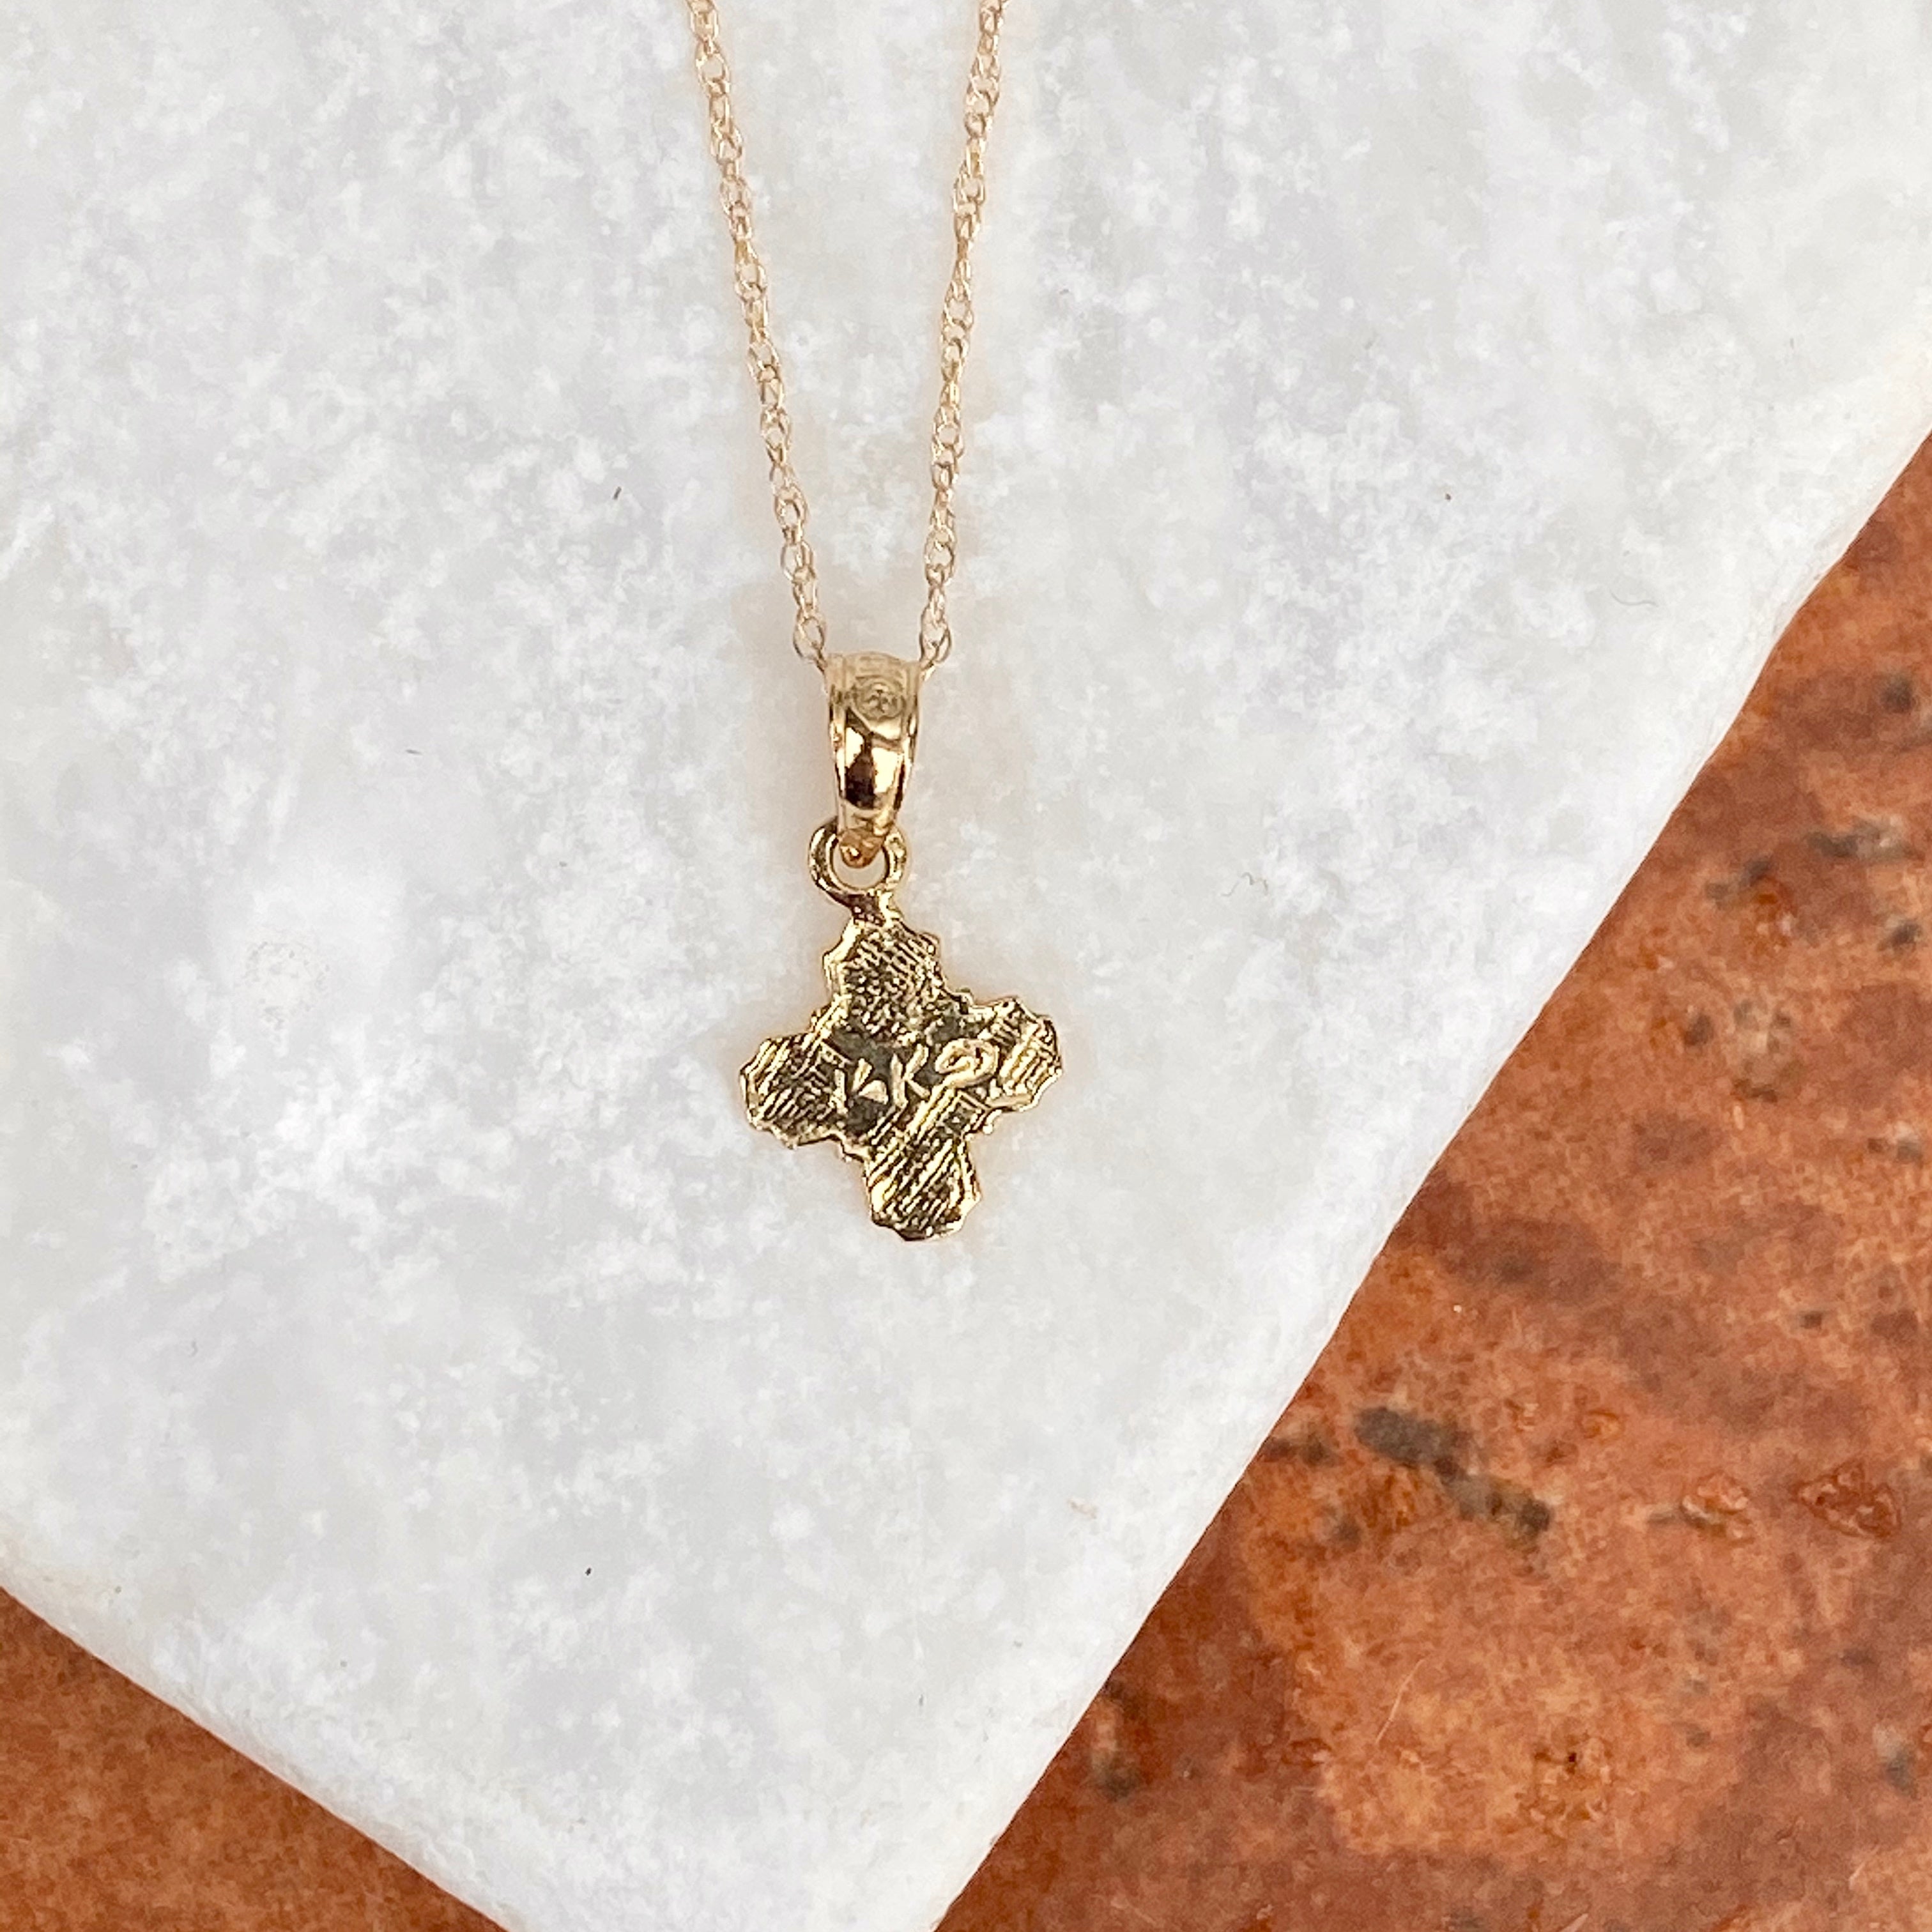 Buy Dainty Virgin Mary Necklace, Catholic Necklace, Religious Necklace,  Baptism, Mother Mary Necklace, Dainty Gold Necklace, Gift for Her Online in  India - Etsy